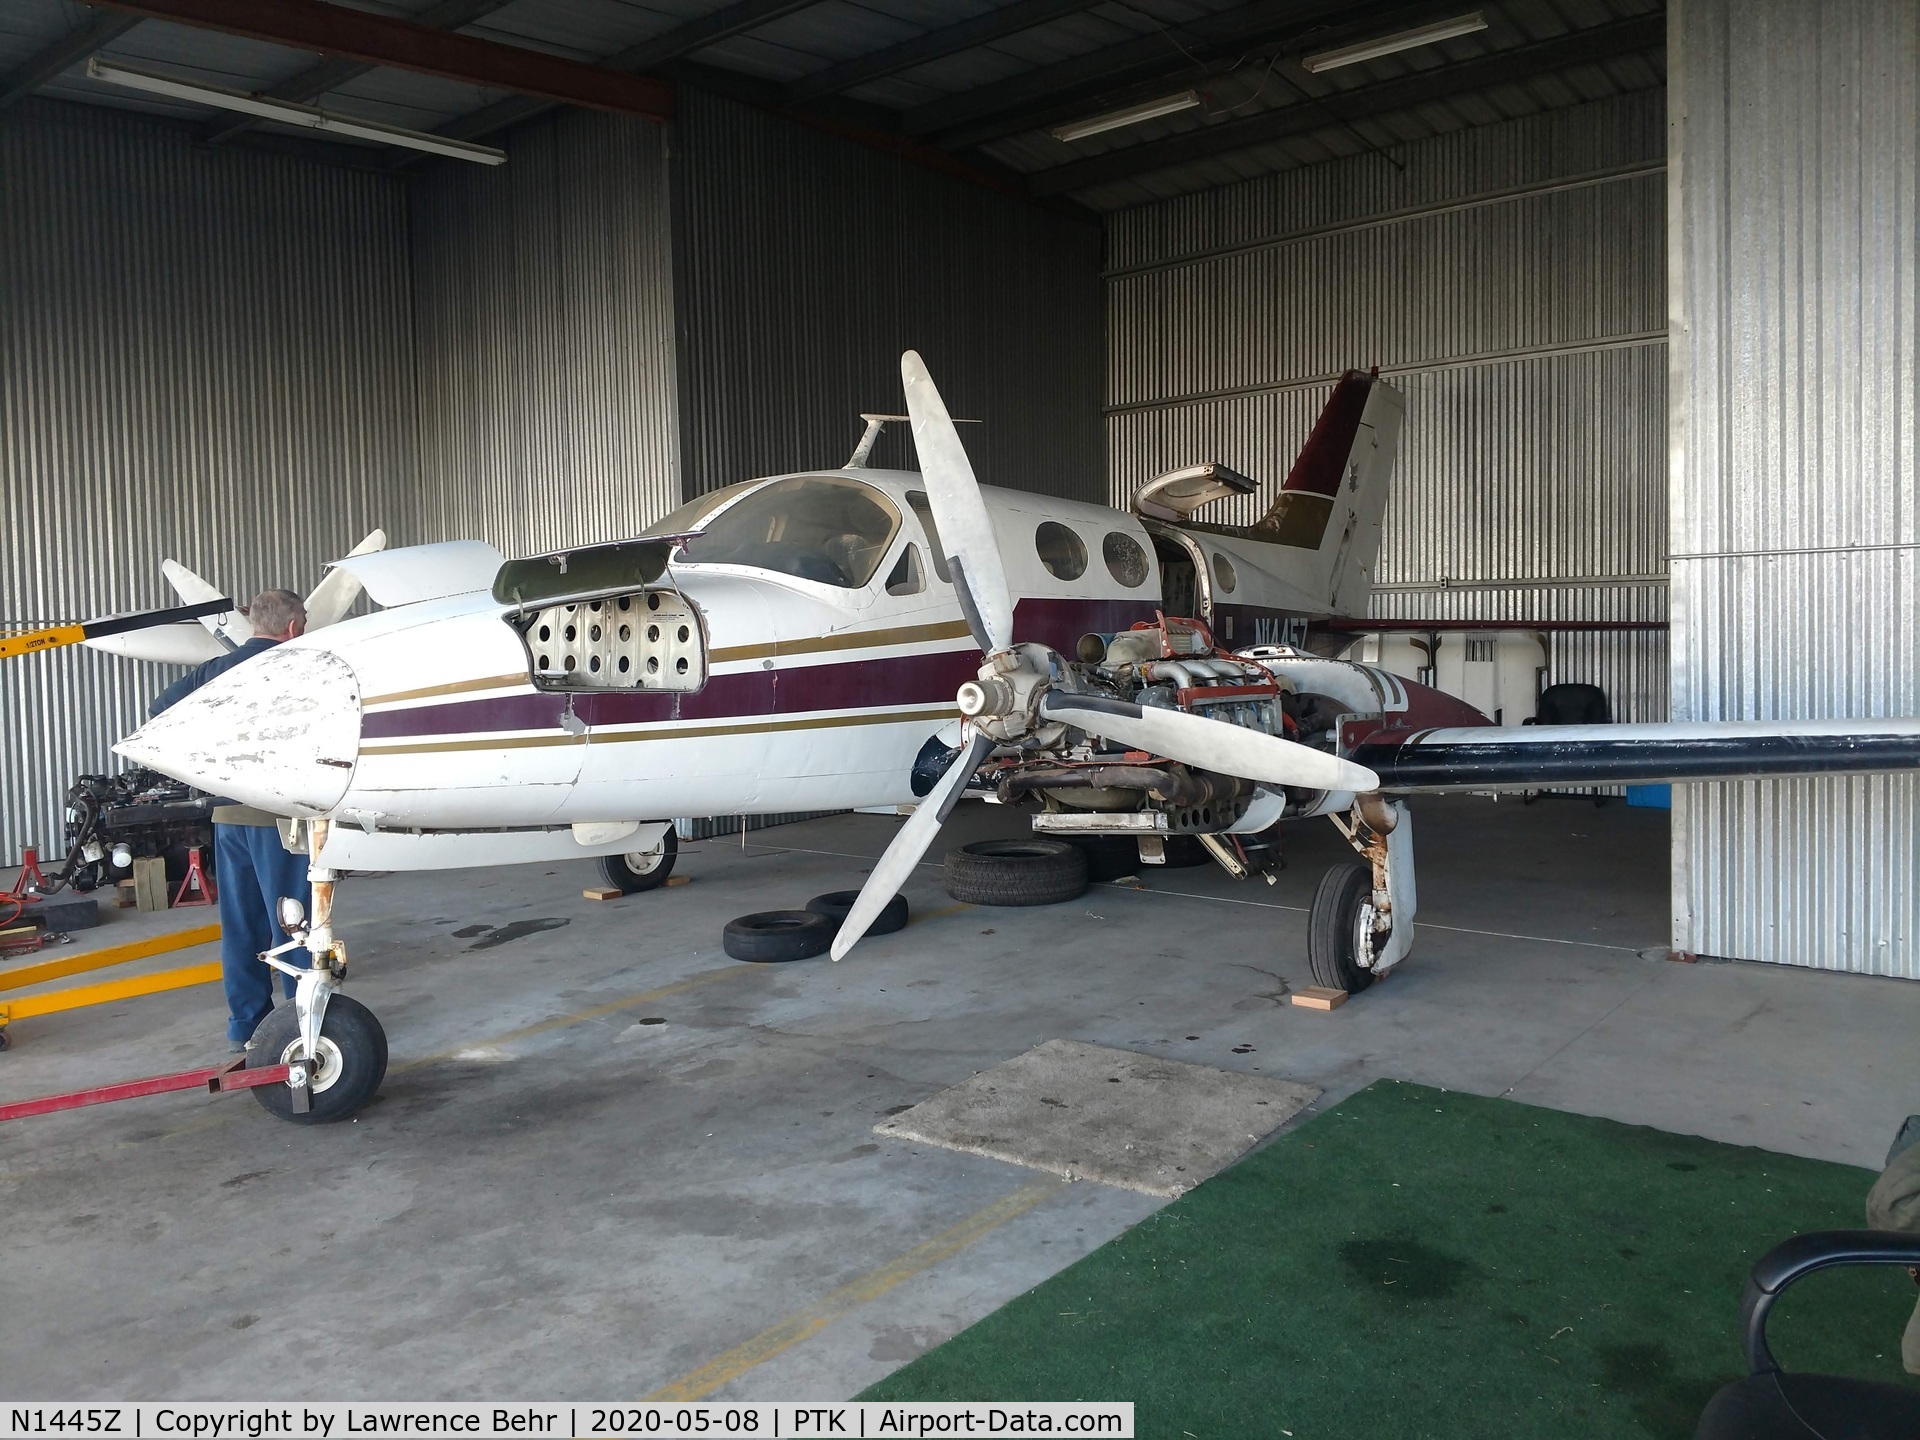 N1445Z, 1968 Cessna 421 Golden Eagle C/N 421-0123, I just purchased this plane on May 13 2020, no log book found, but the hour meter suggests 271 TT, the history is the plane has sat in the open for a number of years.